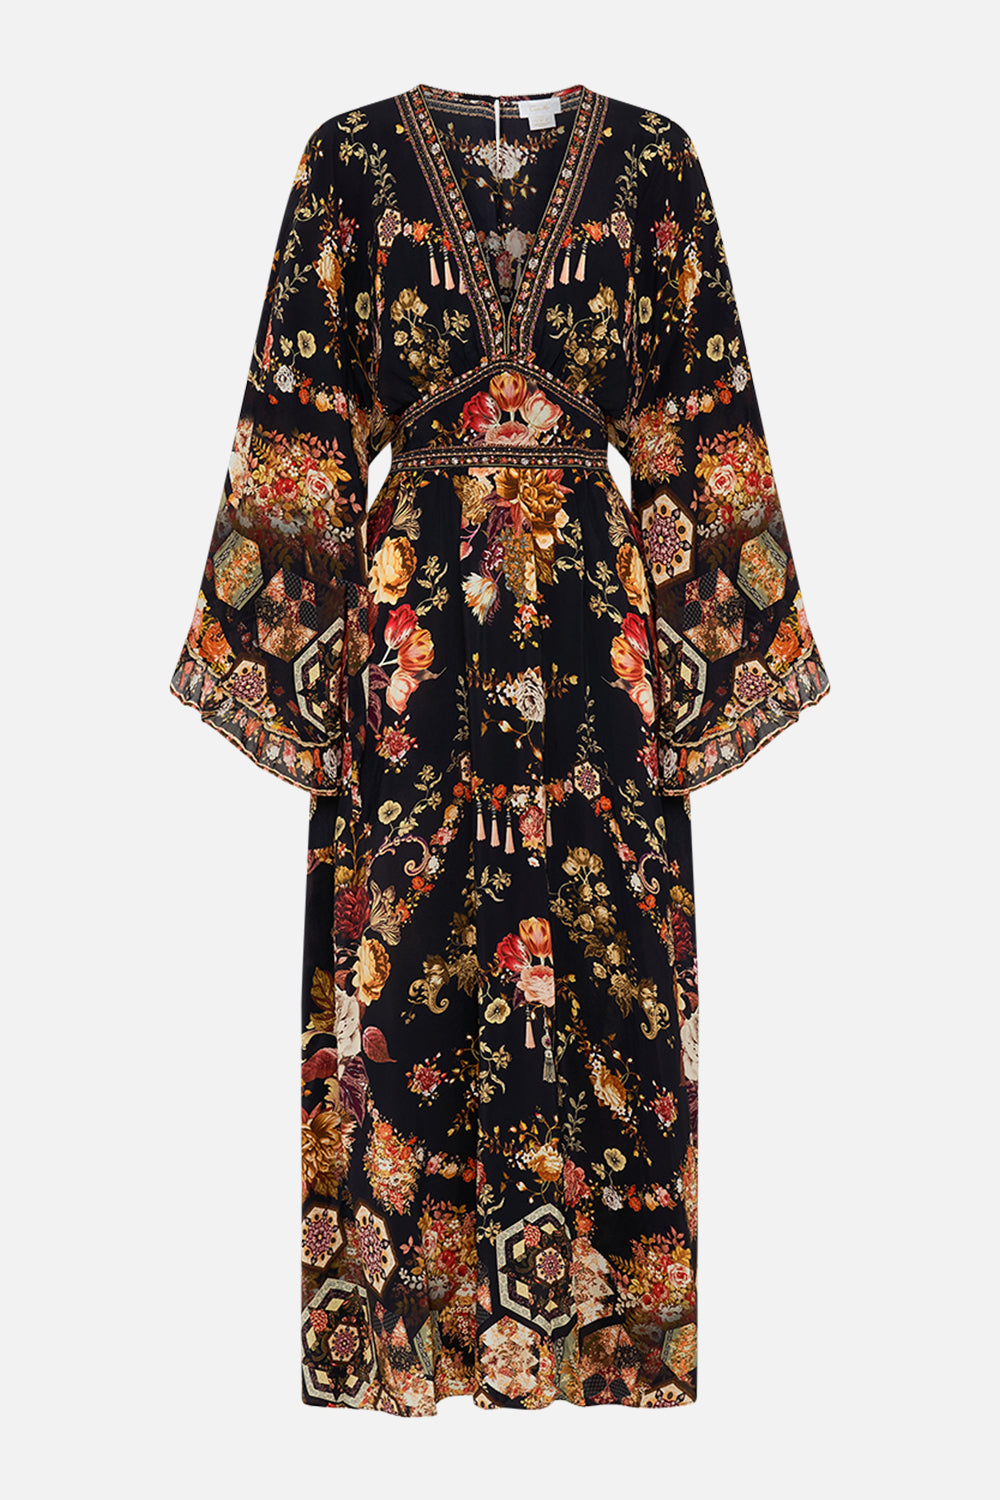 WAISTED DRESS WITH KIMONO SLEEVE STITCHED IN TIME